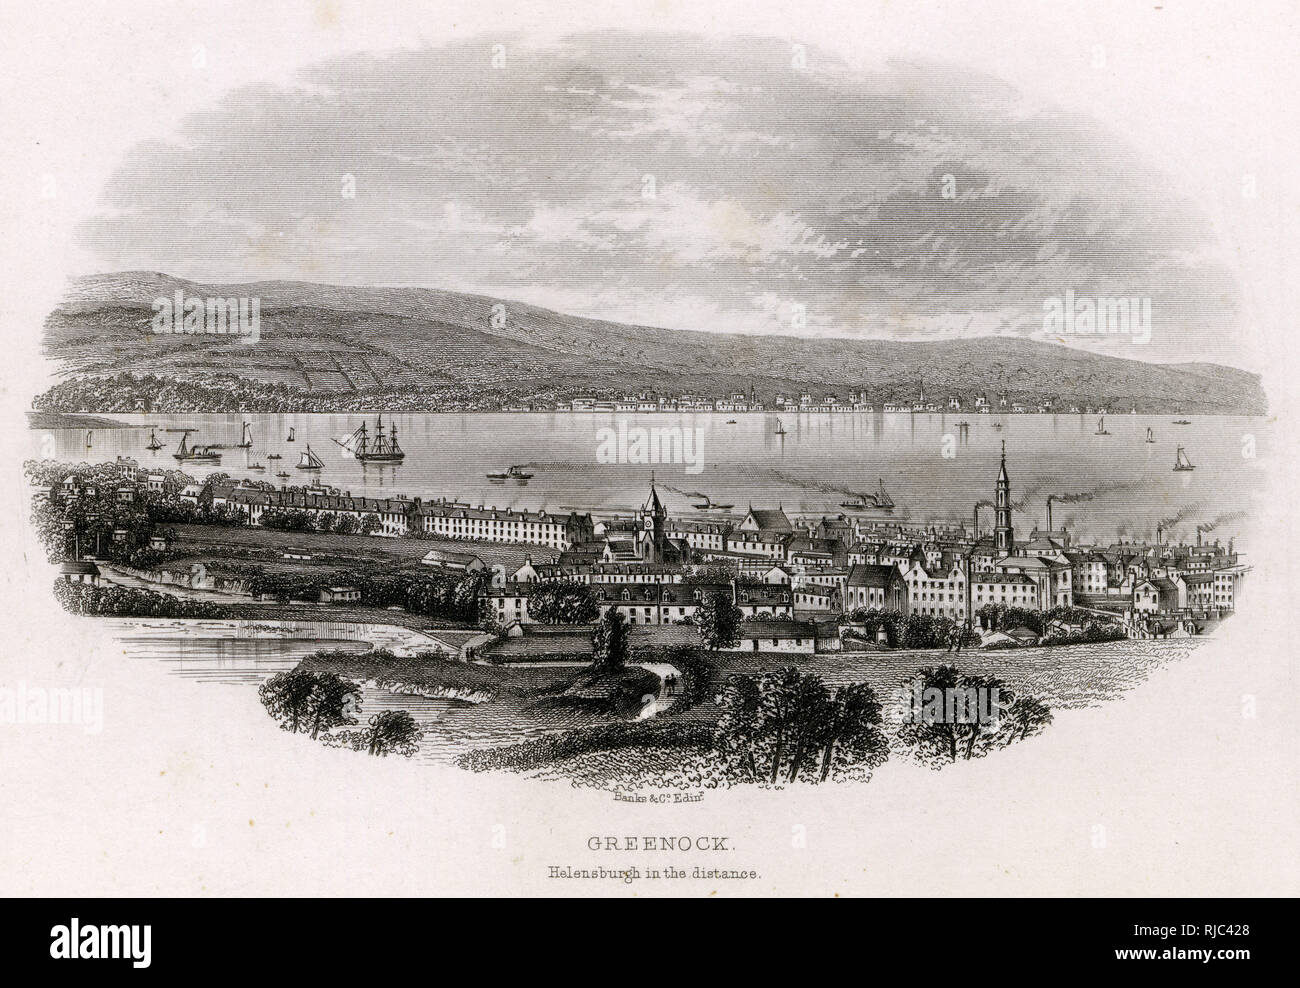 Greenock is a town and administrative centre in the Inverclyde council area in Scotland and a former burgh within the historic county of Renfrewshire, located in the west central Lowlands of Scotland. Helensburgh can be seen in the distance. Stock Photo